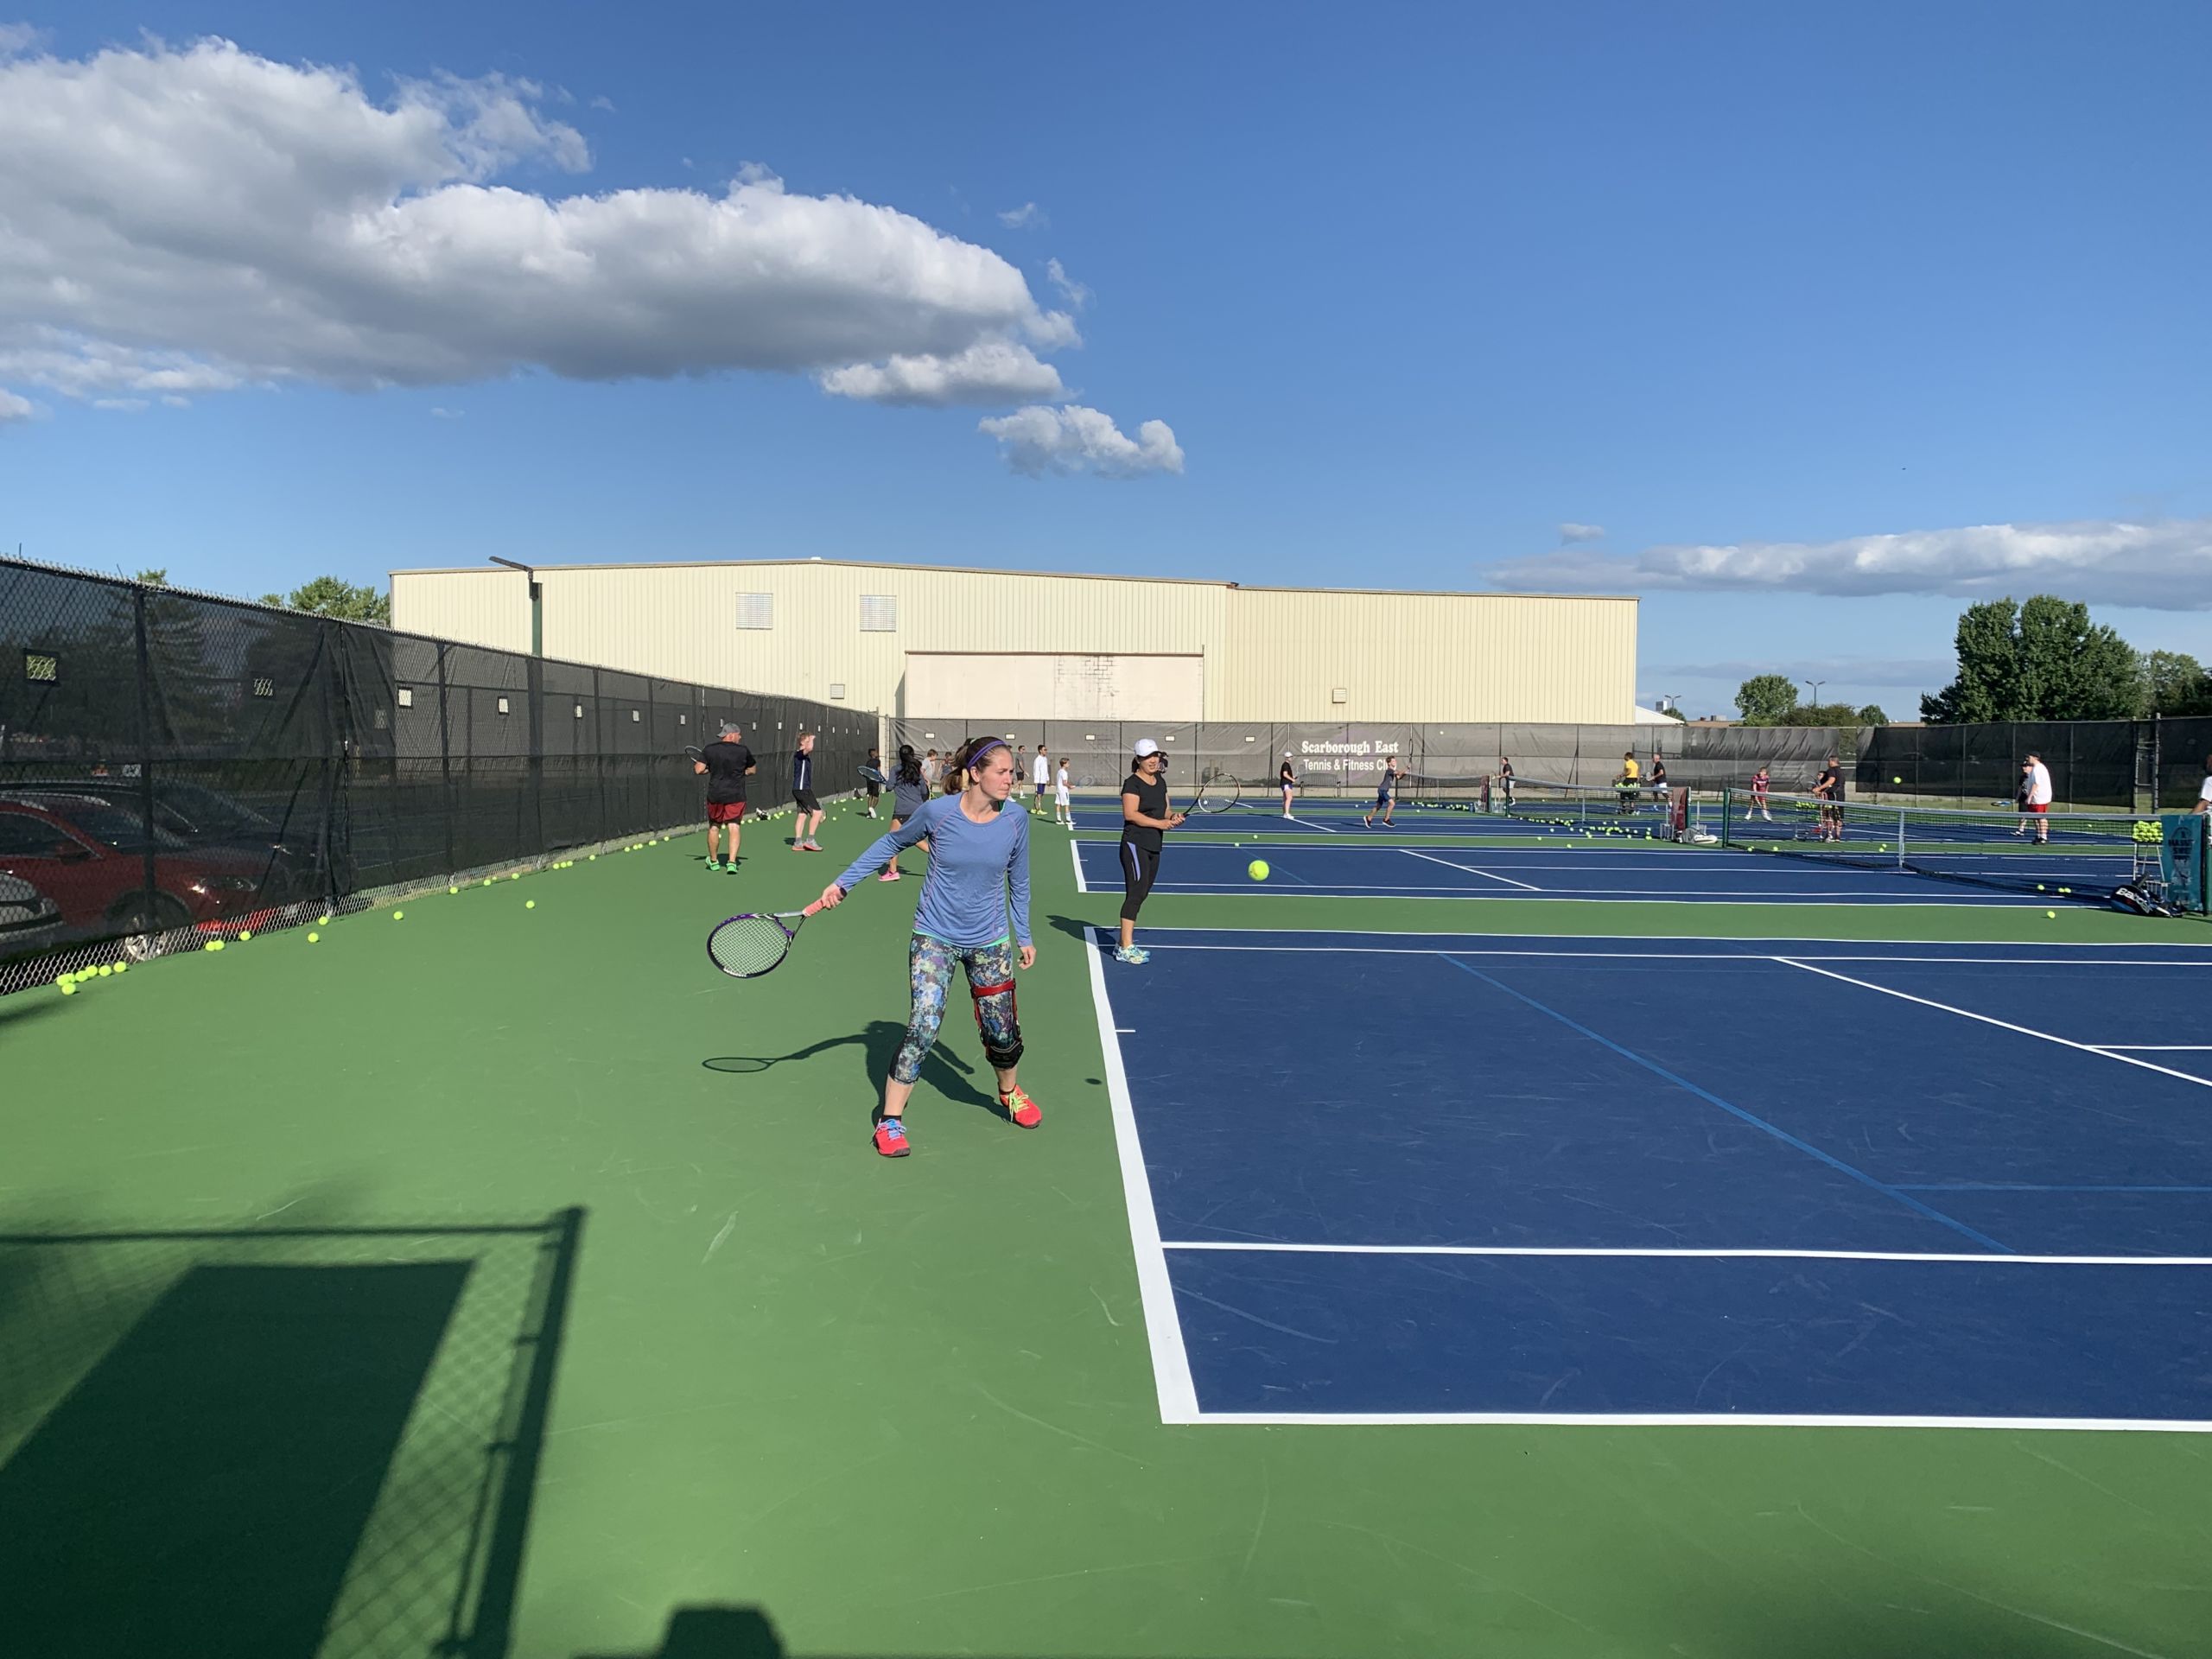 Training on the outdoor courts